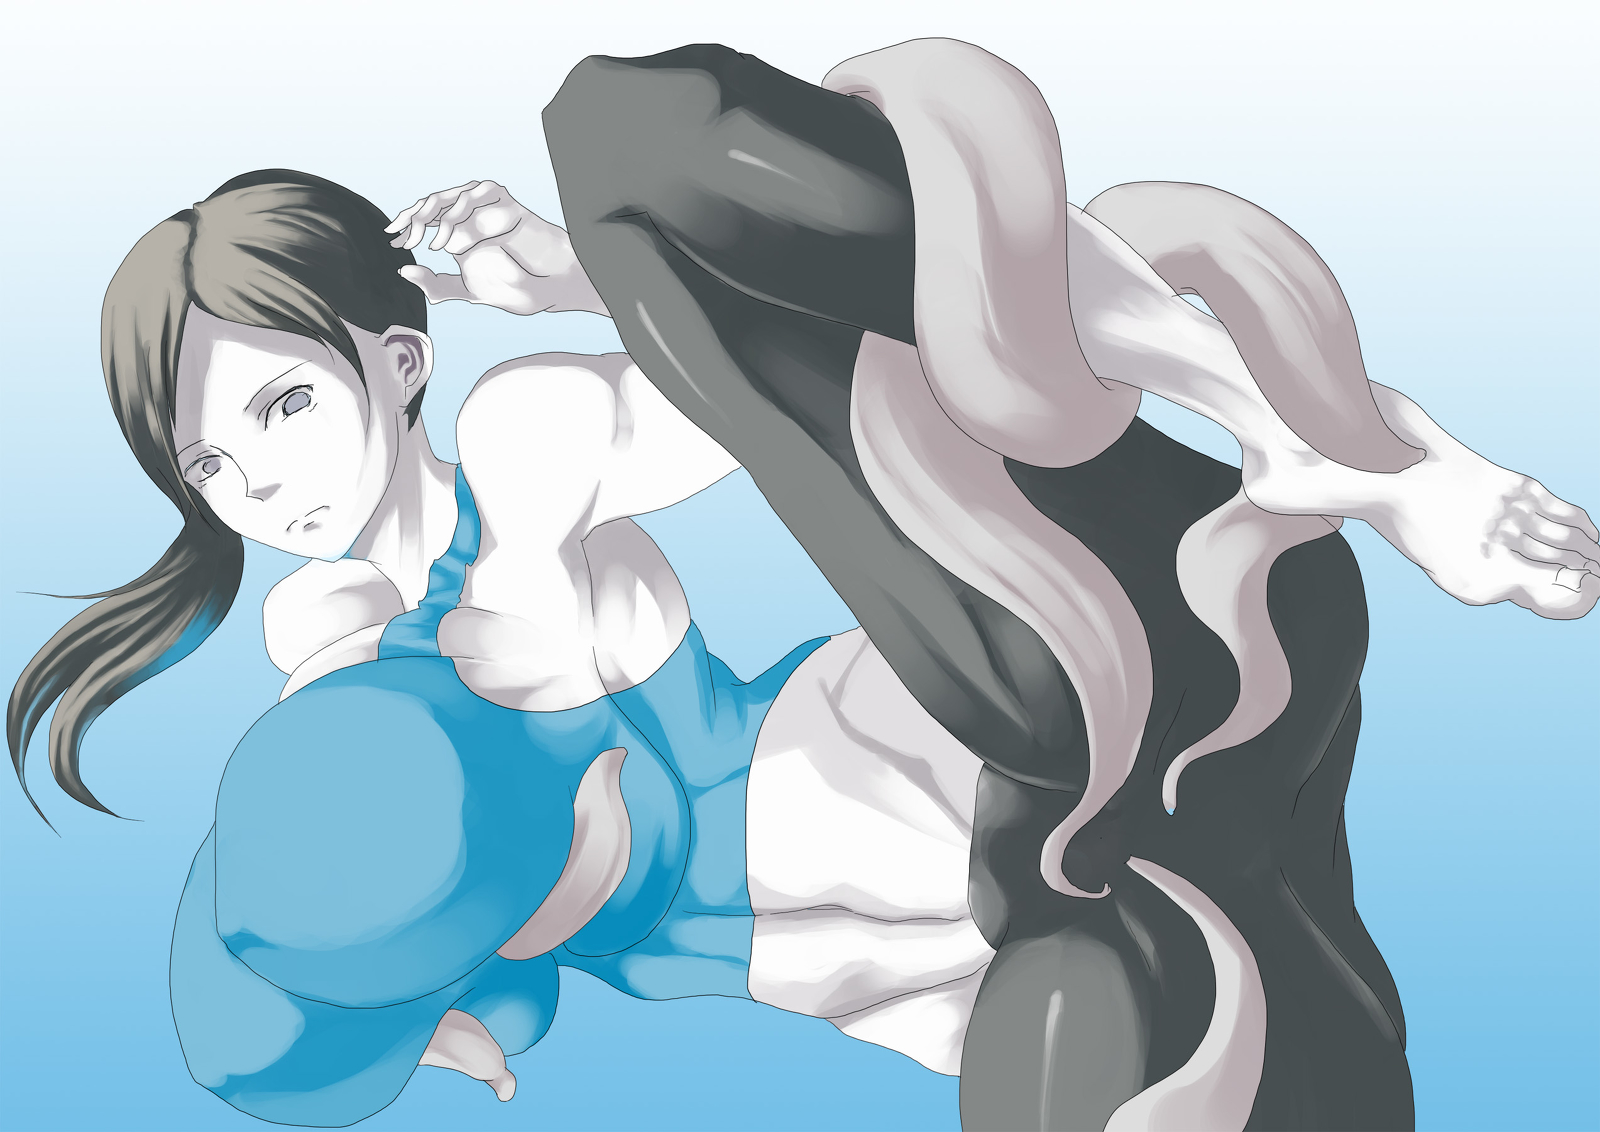 Wii fit trainer rule 34